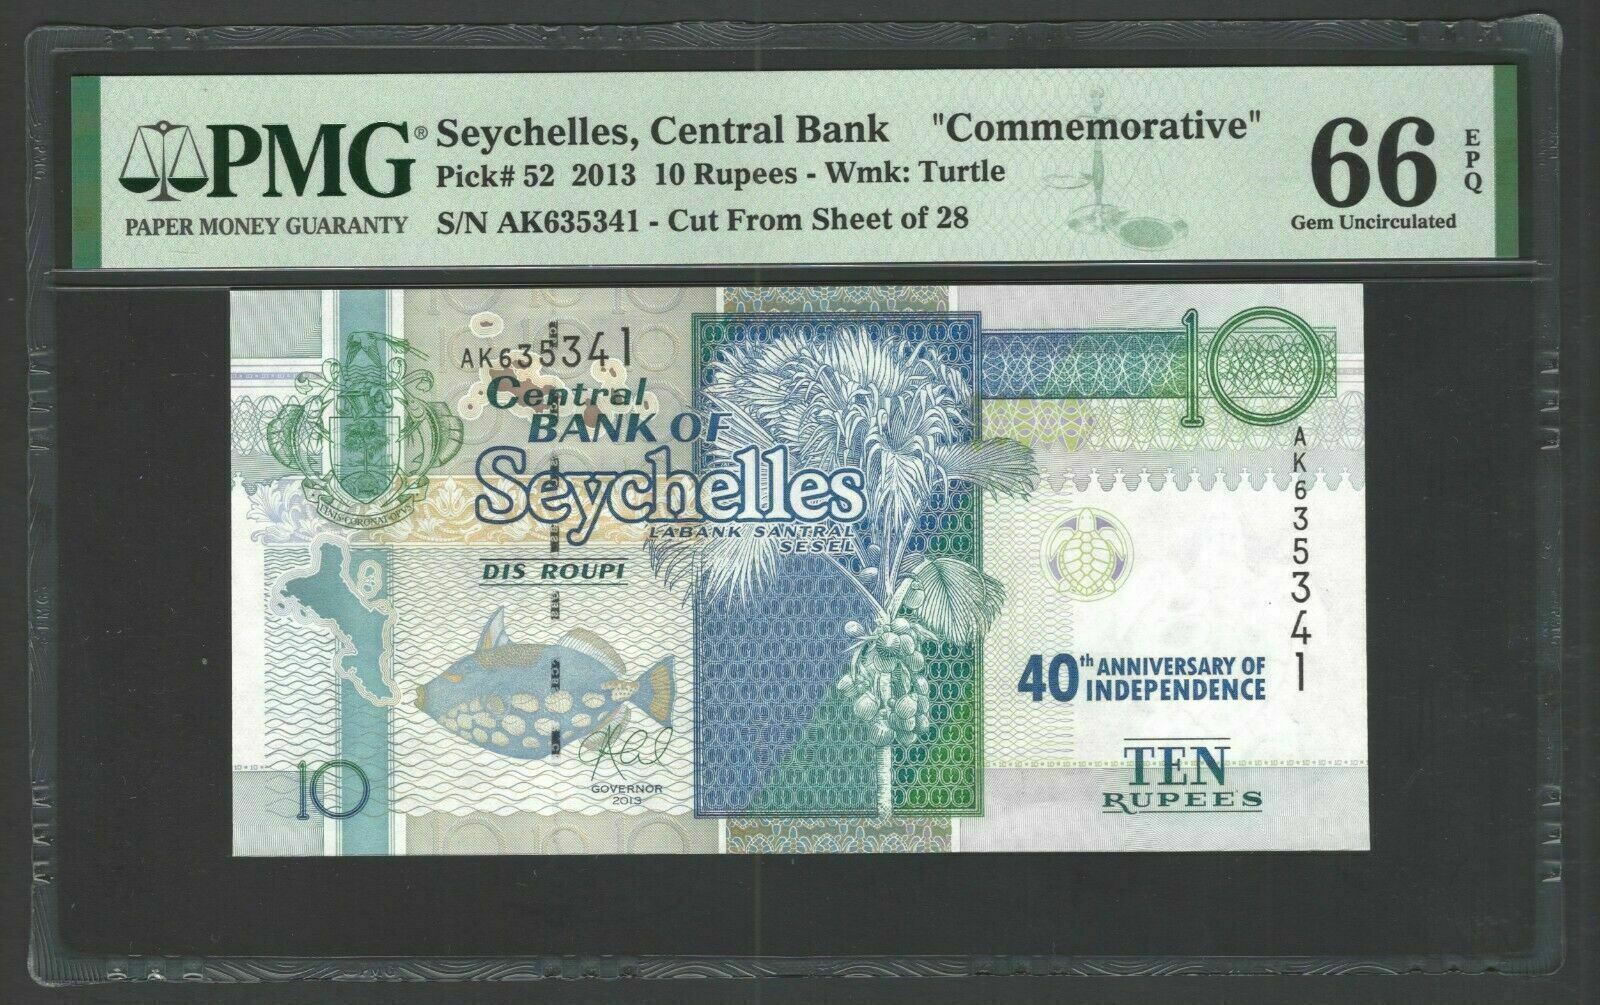 Seychelles 10 Rupees Nd(2013) P52 Commemorative Uncirculated Grade 66